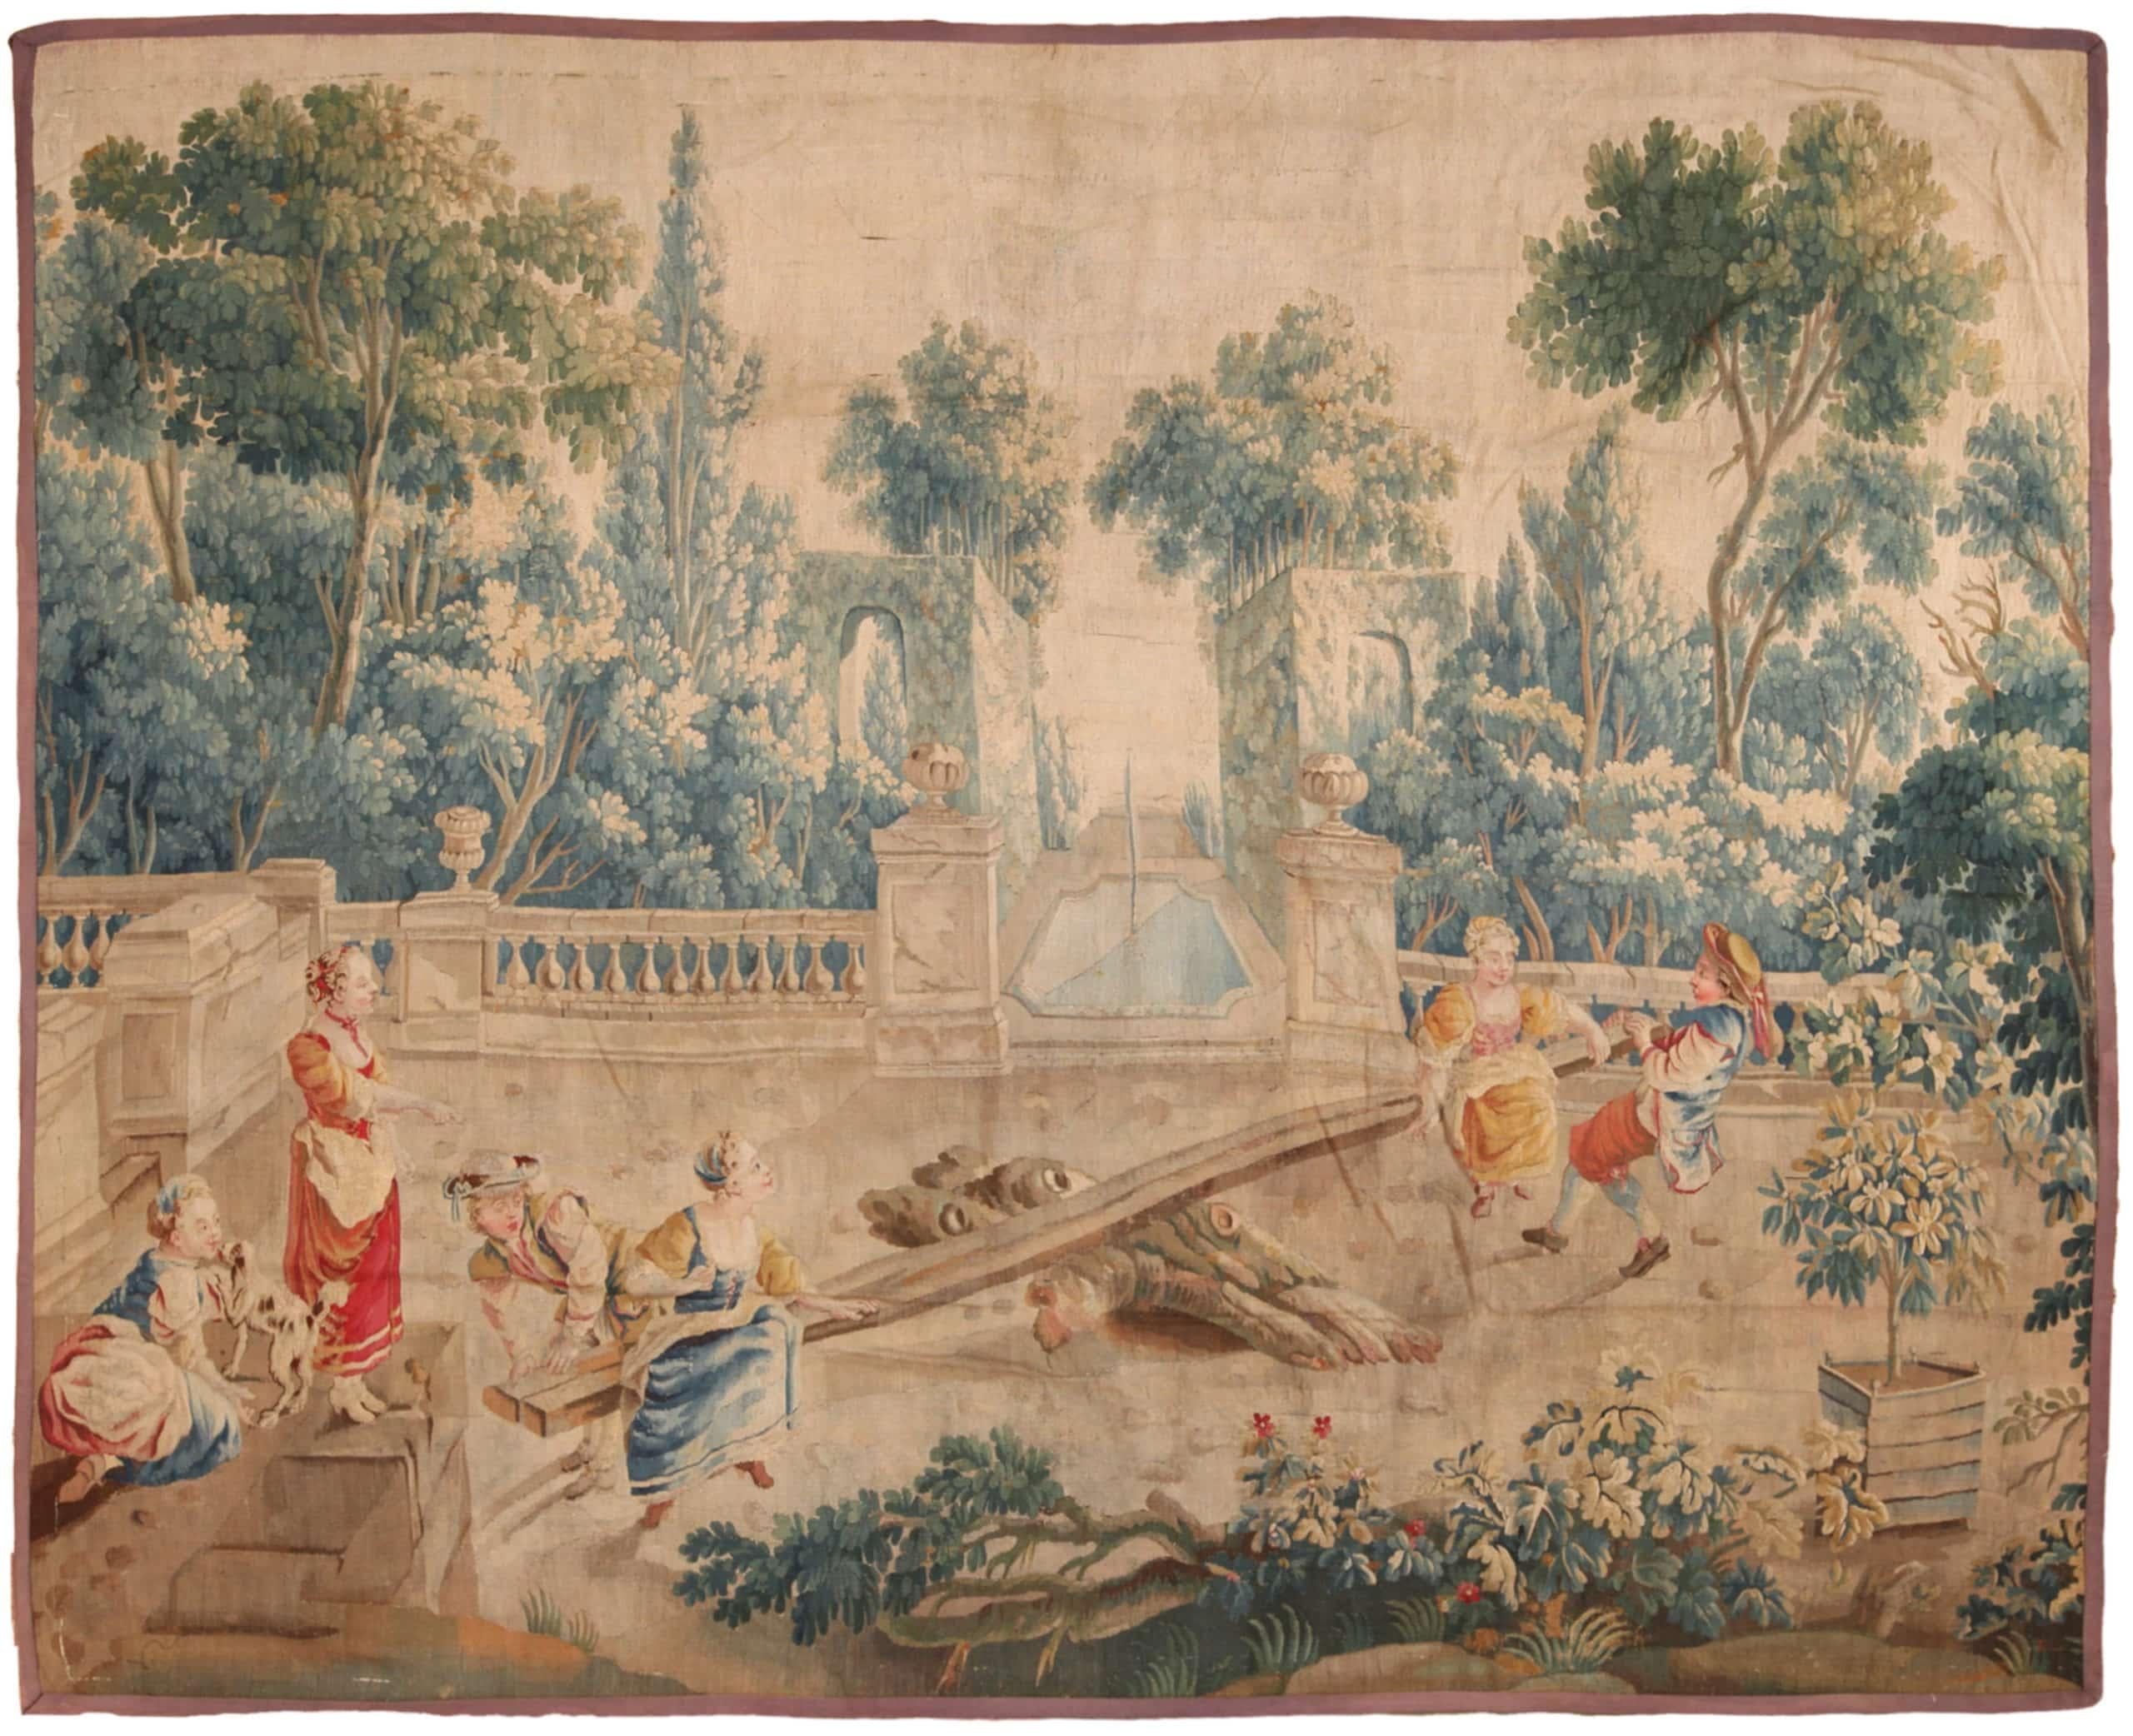 Romantic 17th Century Wool and Silk Stunning Antique Wall Hanging French Tapestry, Tapestry Origin: France, Date Woven: 17th Century